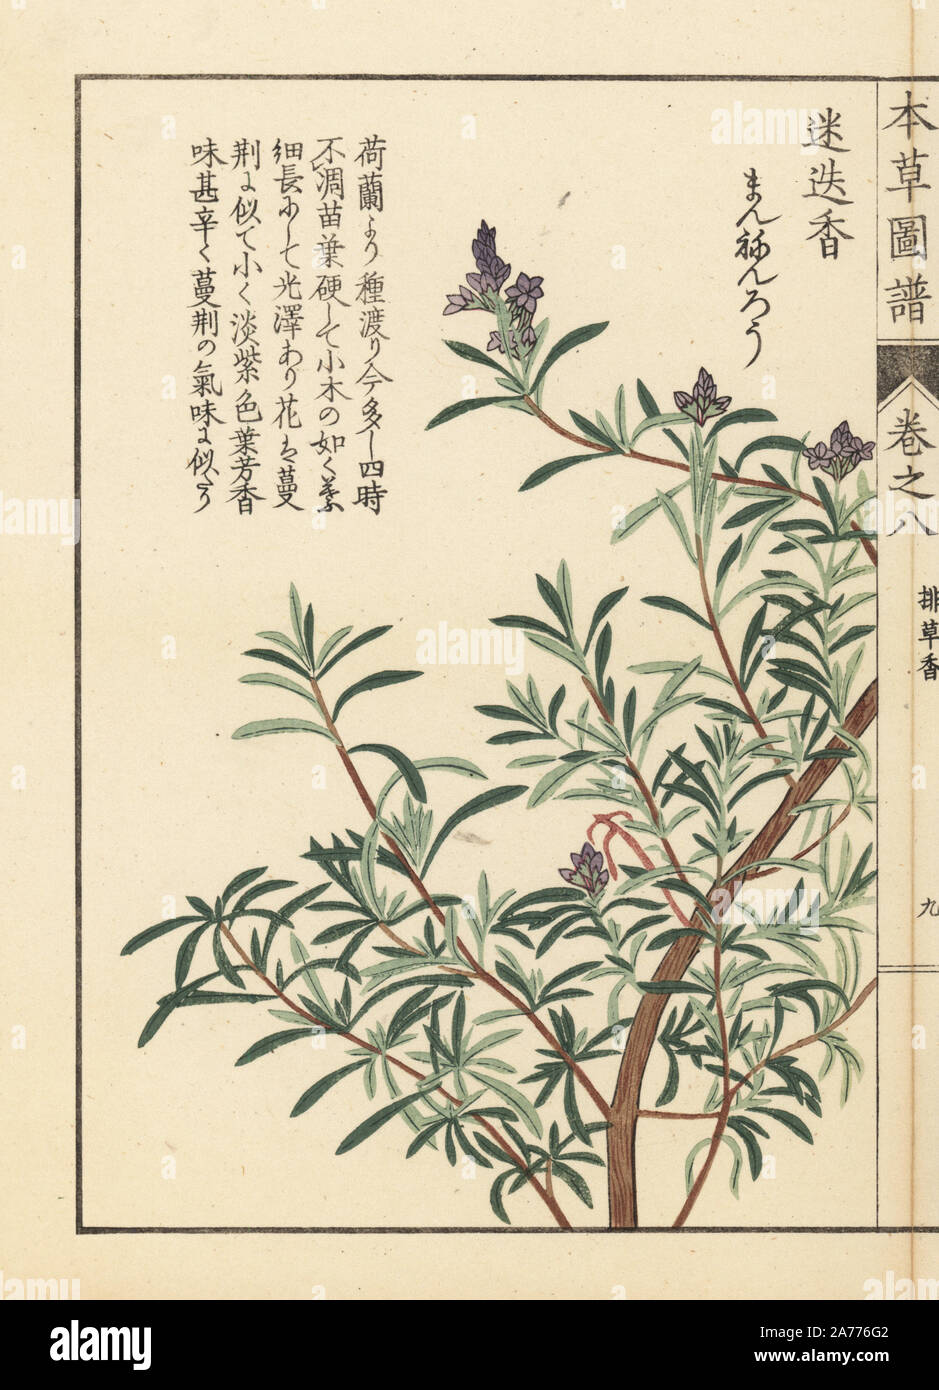 Rosemary, Rosmarinus officinalis. Colour-printed woodblock engraving by Kan'en Iwasaki from 'Honzo Zufu,' an Illustrated Guide to Medicinal Plants, Japan, 1884. Iwasaki (1786-1842) was a Japanese botanist, entomologist and zoologist. He was one of the first Japanese botanists to incorporate western knowledge into his studies. Stock Photo